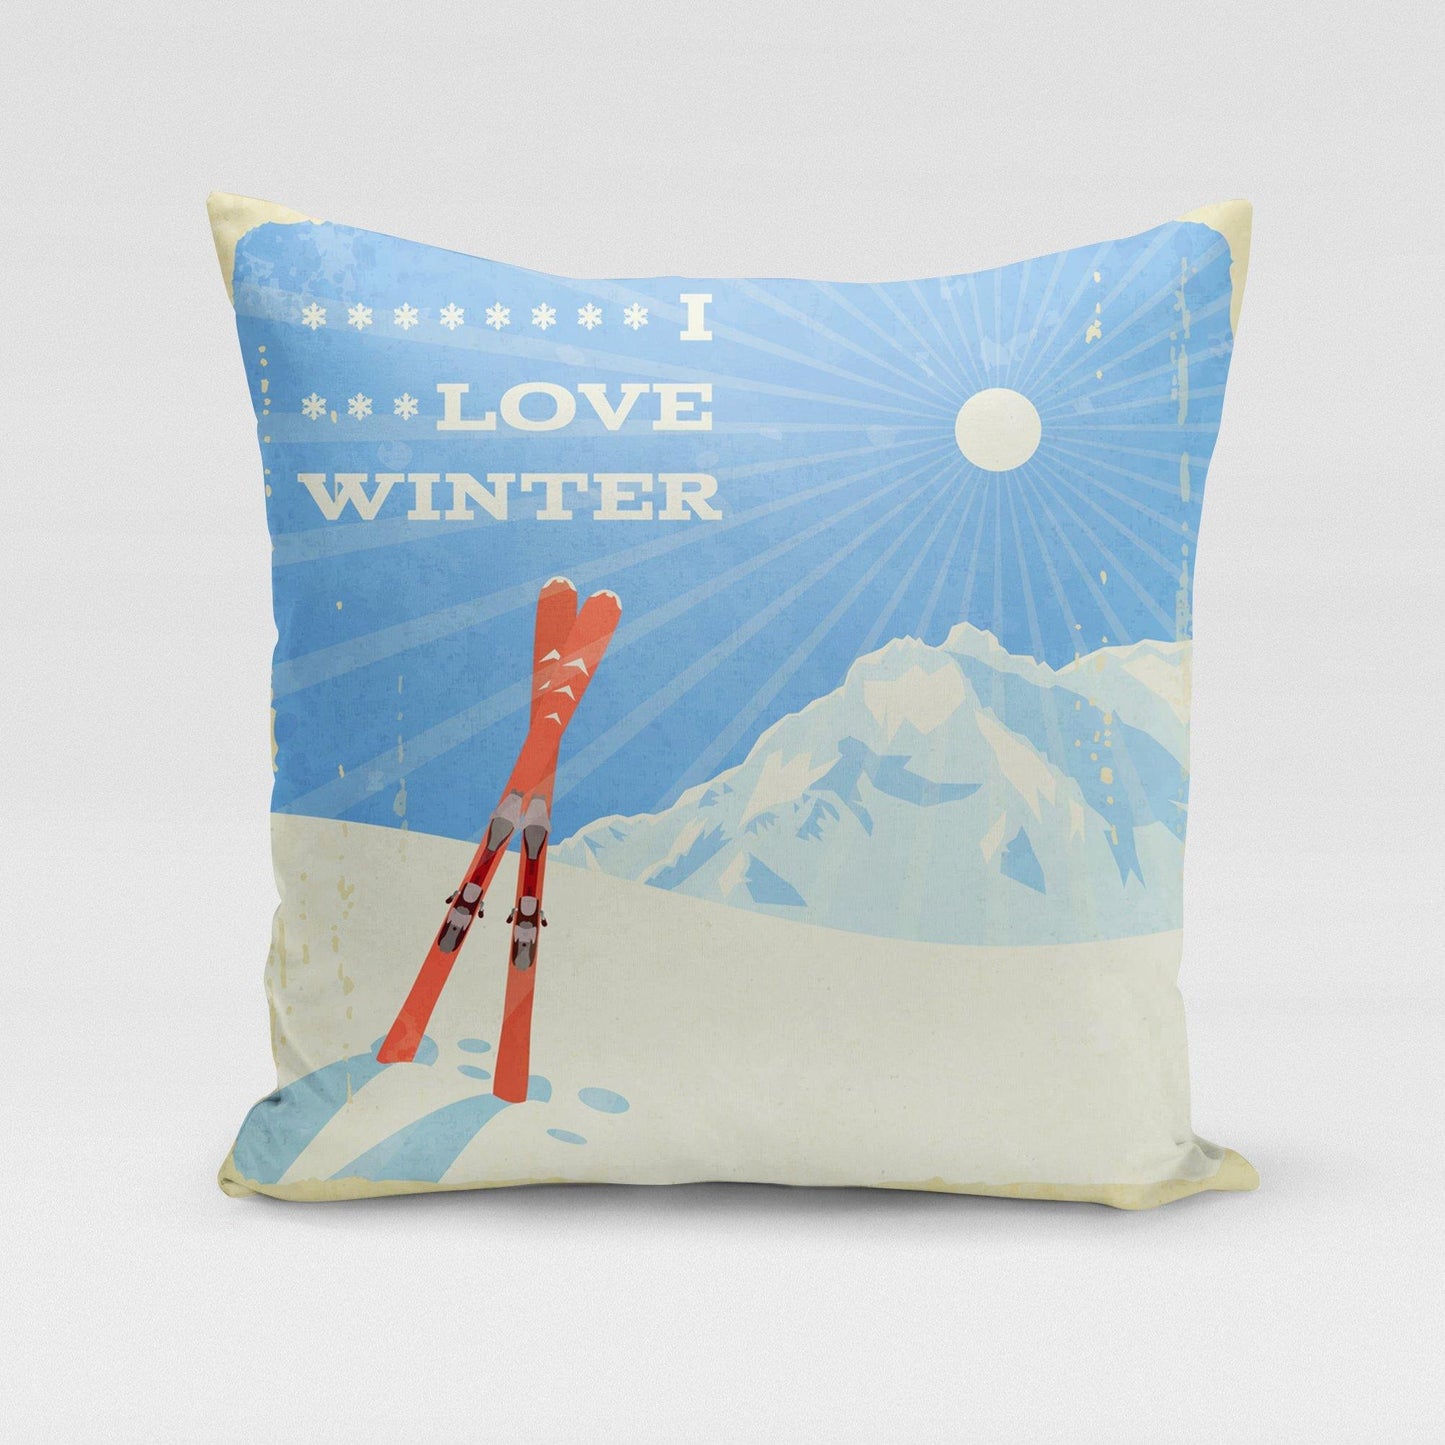 I Love Winter Pillow Cover